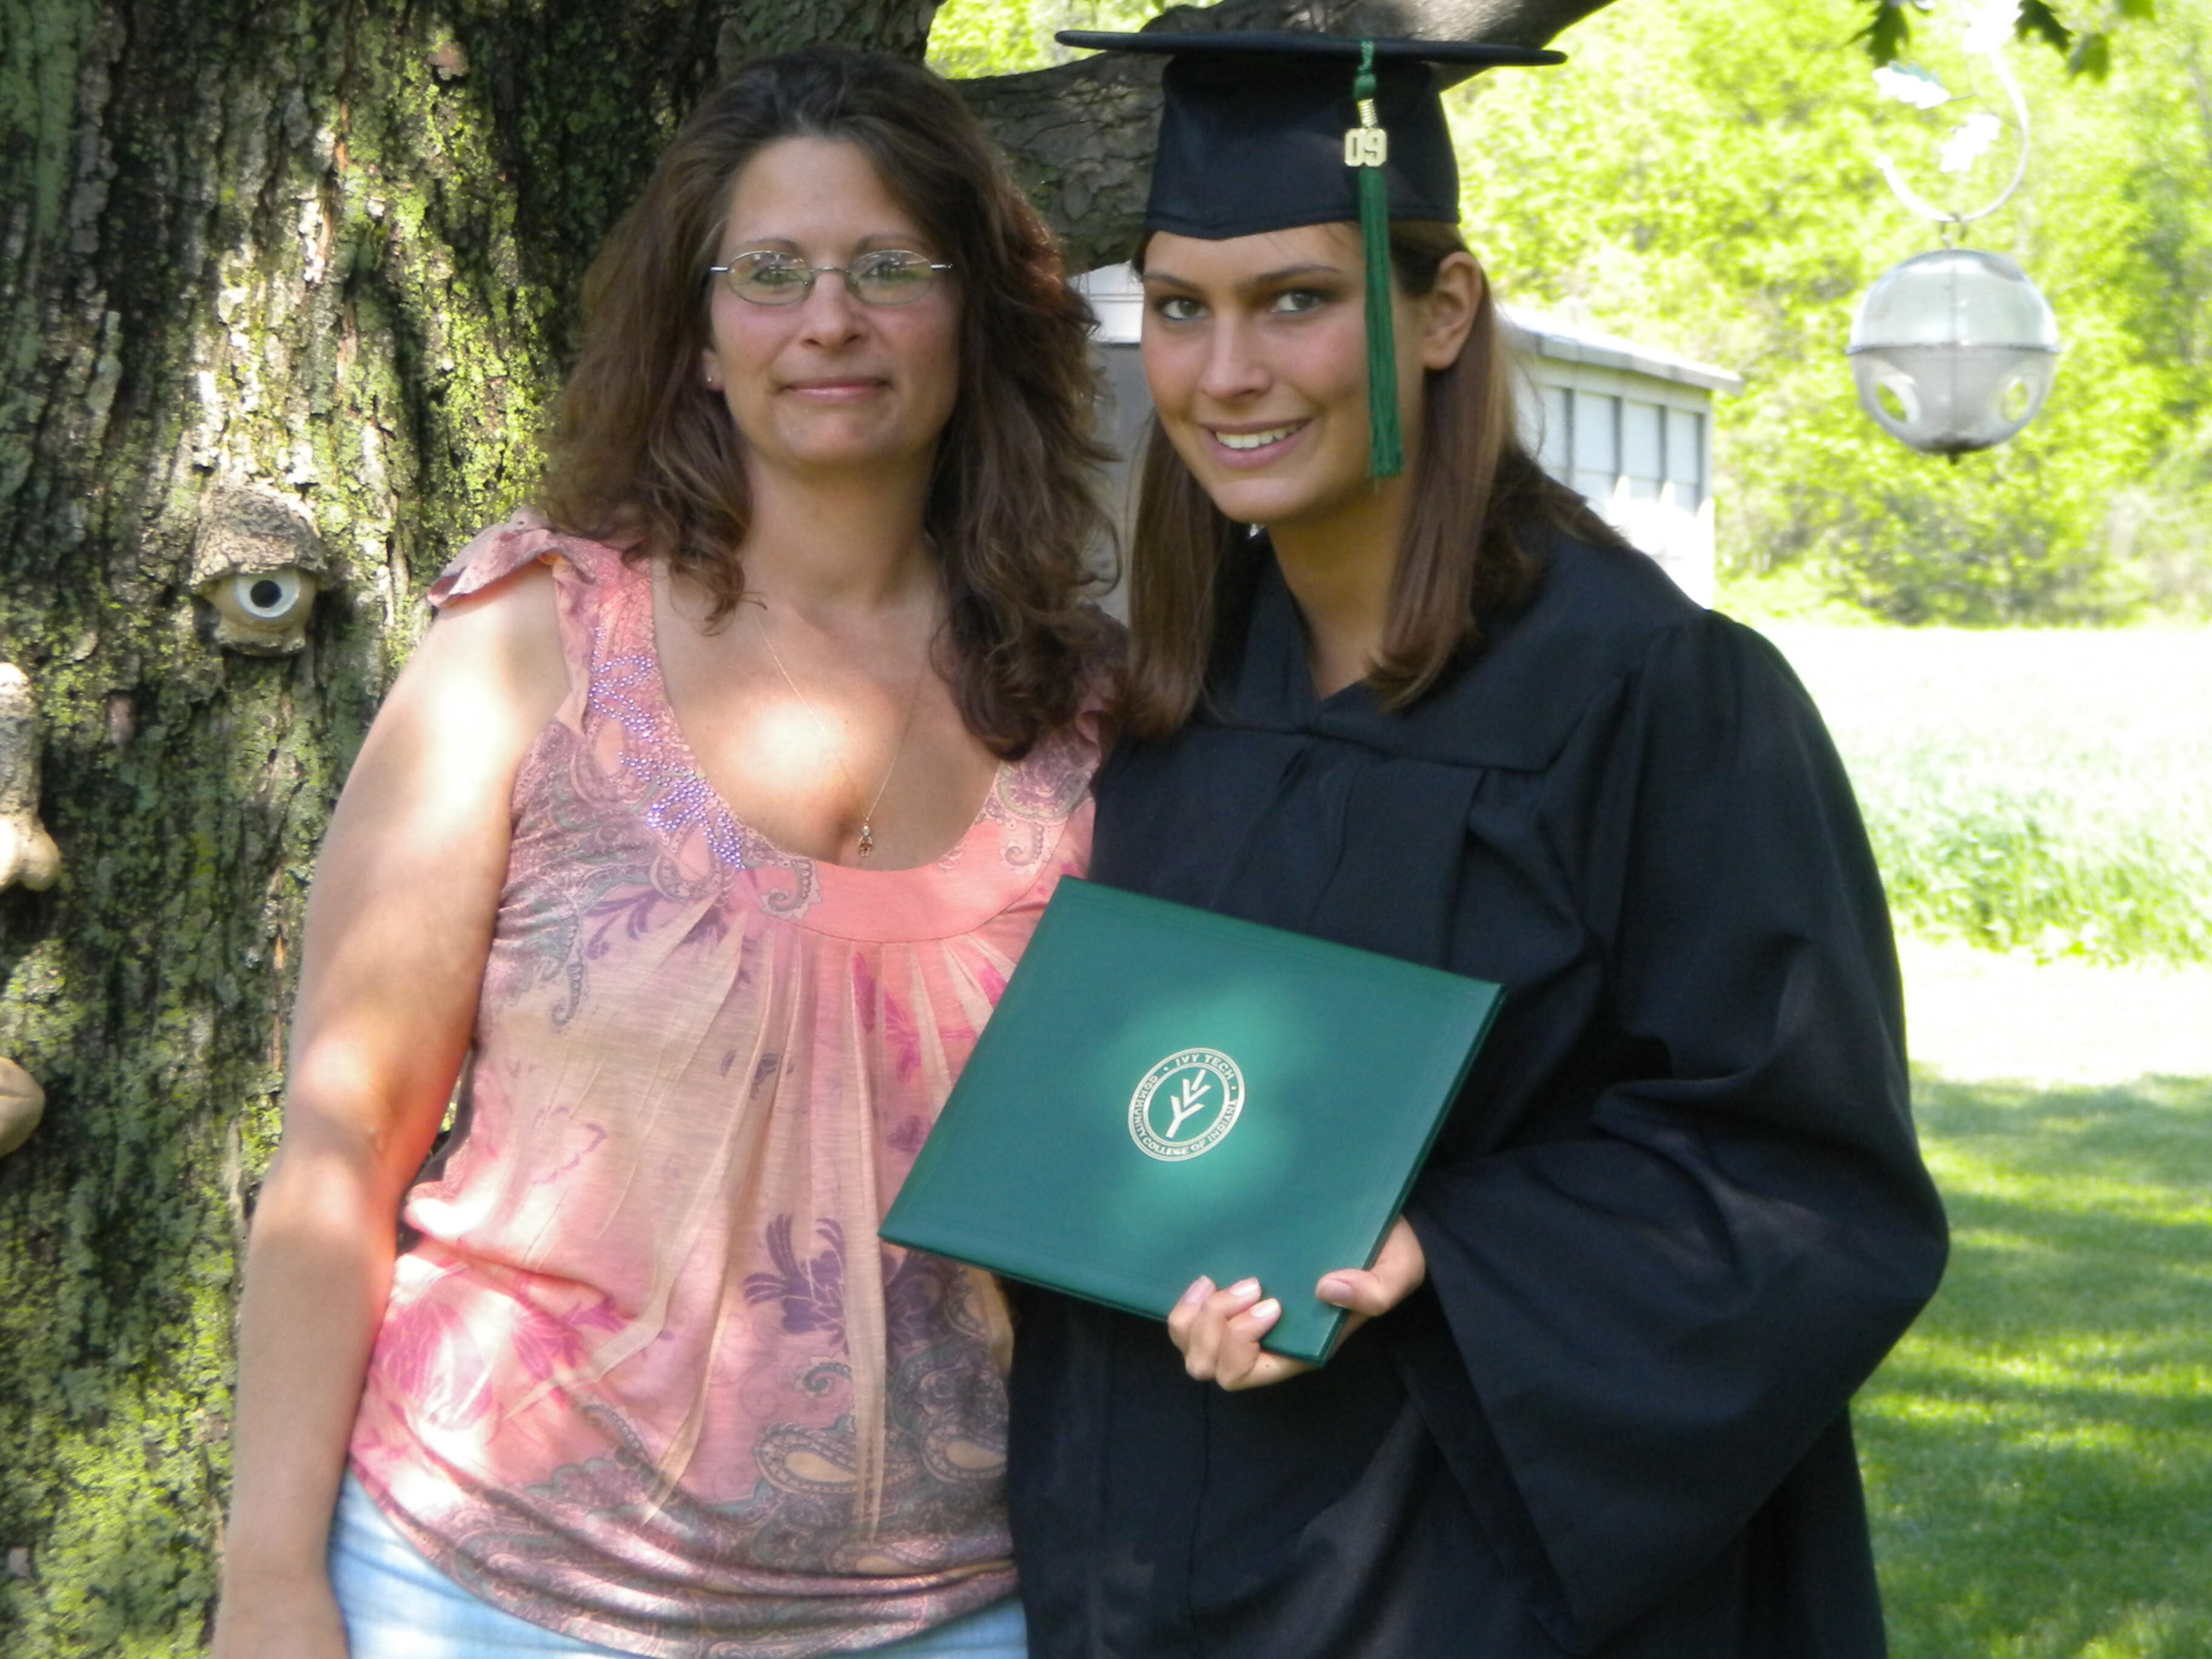 Rhiannon and her mother, Cheryl, celebrate her Ivy Tech graduation. Rhiannon then went on to earn a bachelor's degree in business from Trine University.